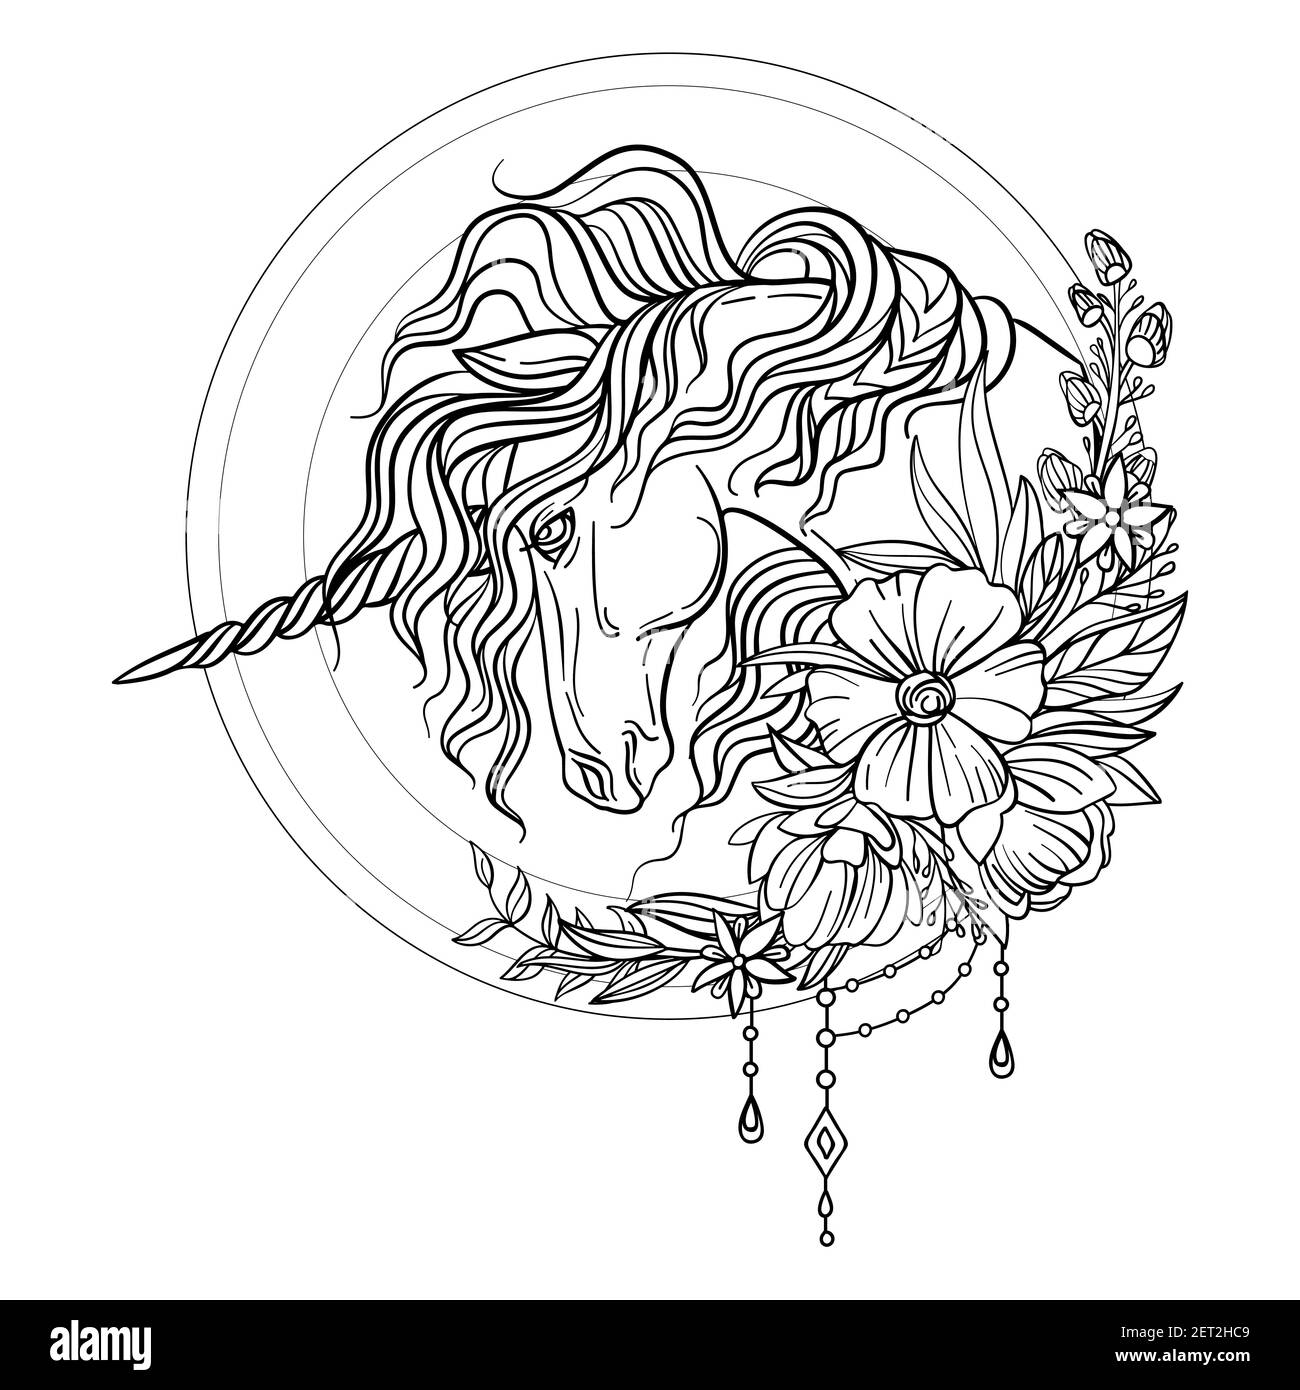 Head of the unicorn in profile with a long mane in floral frame. Vector black and white isolated contour illustration for coloring book pages, design, Stock Vector